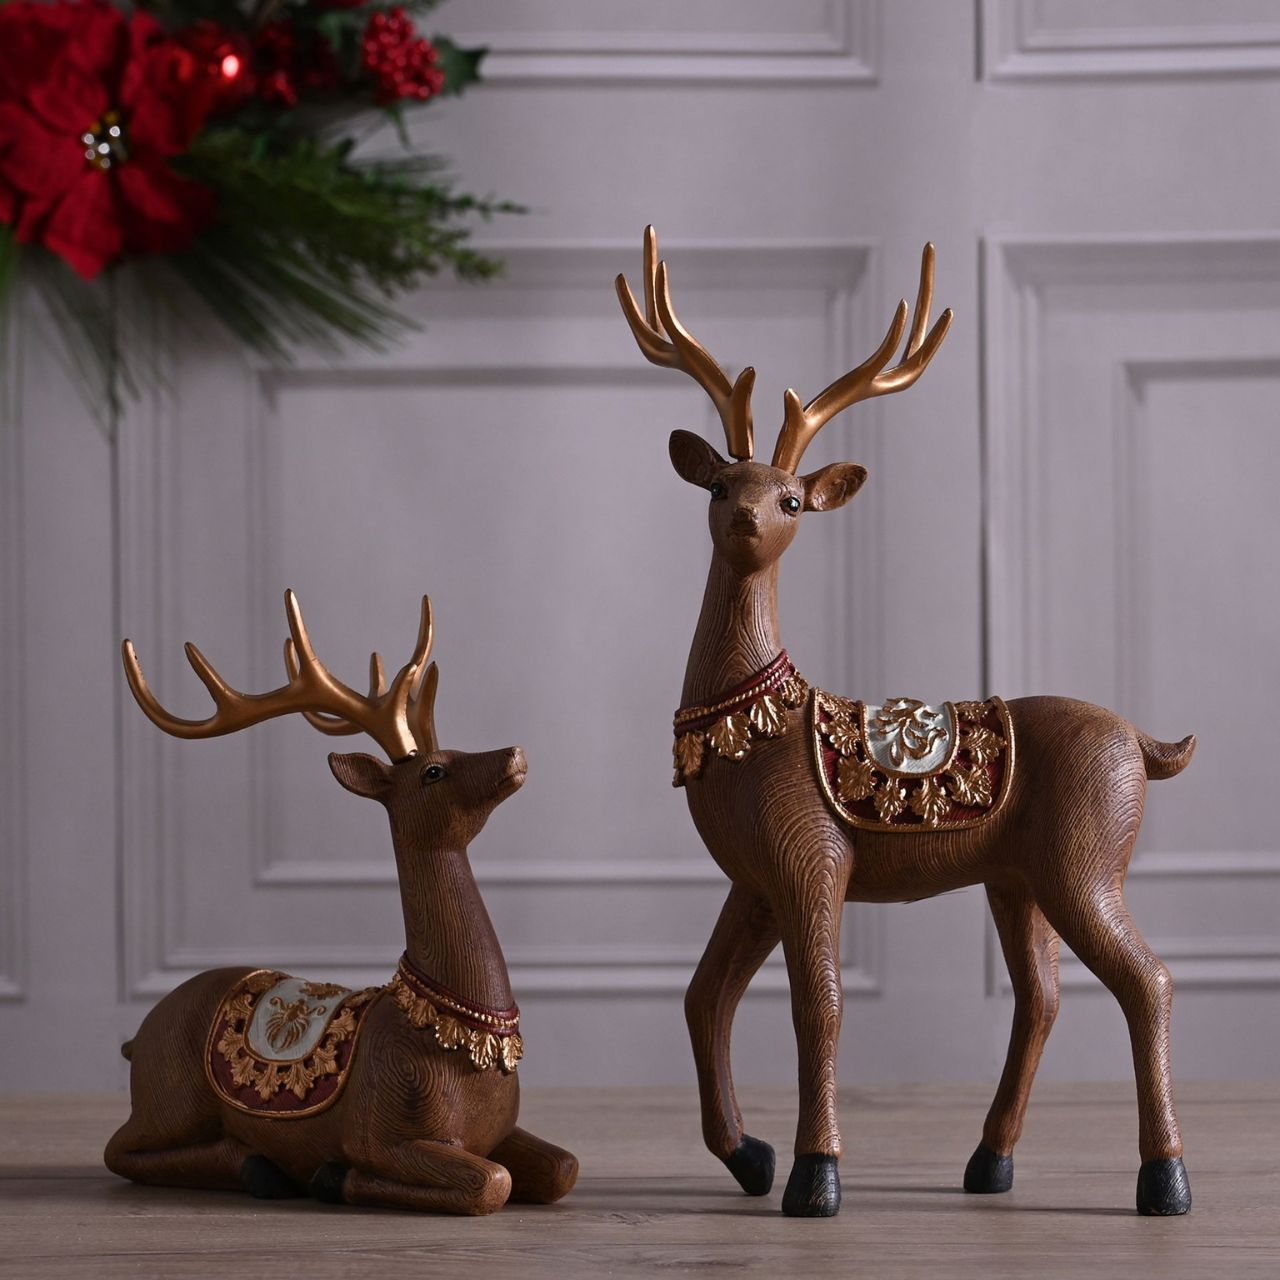 Christmas Sitting Reindeer Decoration  A Christmas sitting reindeer.  This charming Christmas decoration perfectly blends traditional and modern touches this festive season.